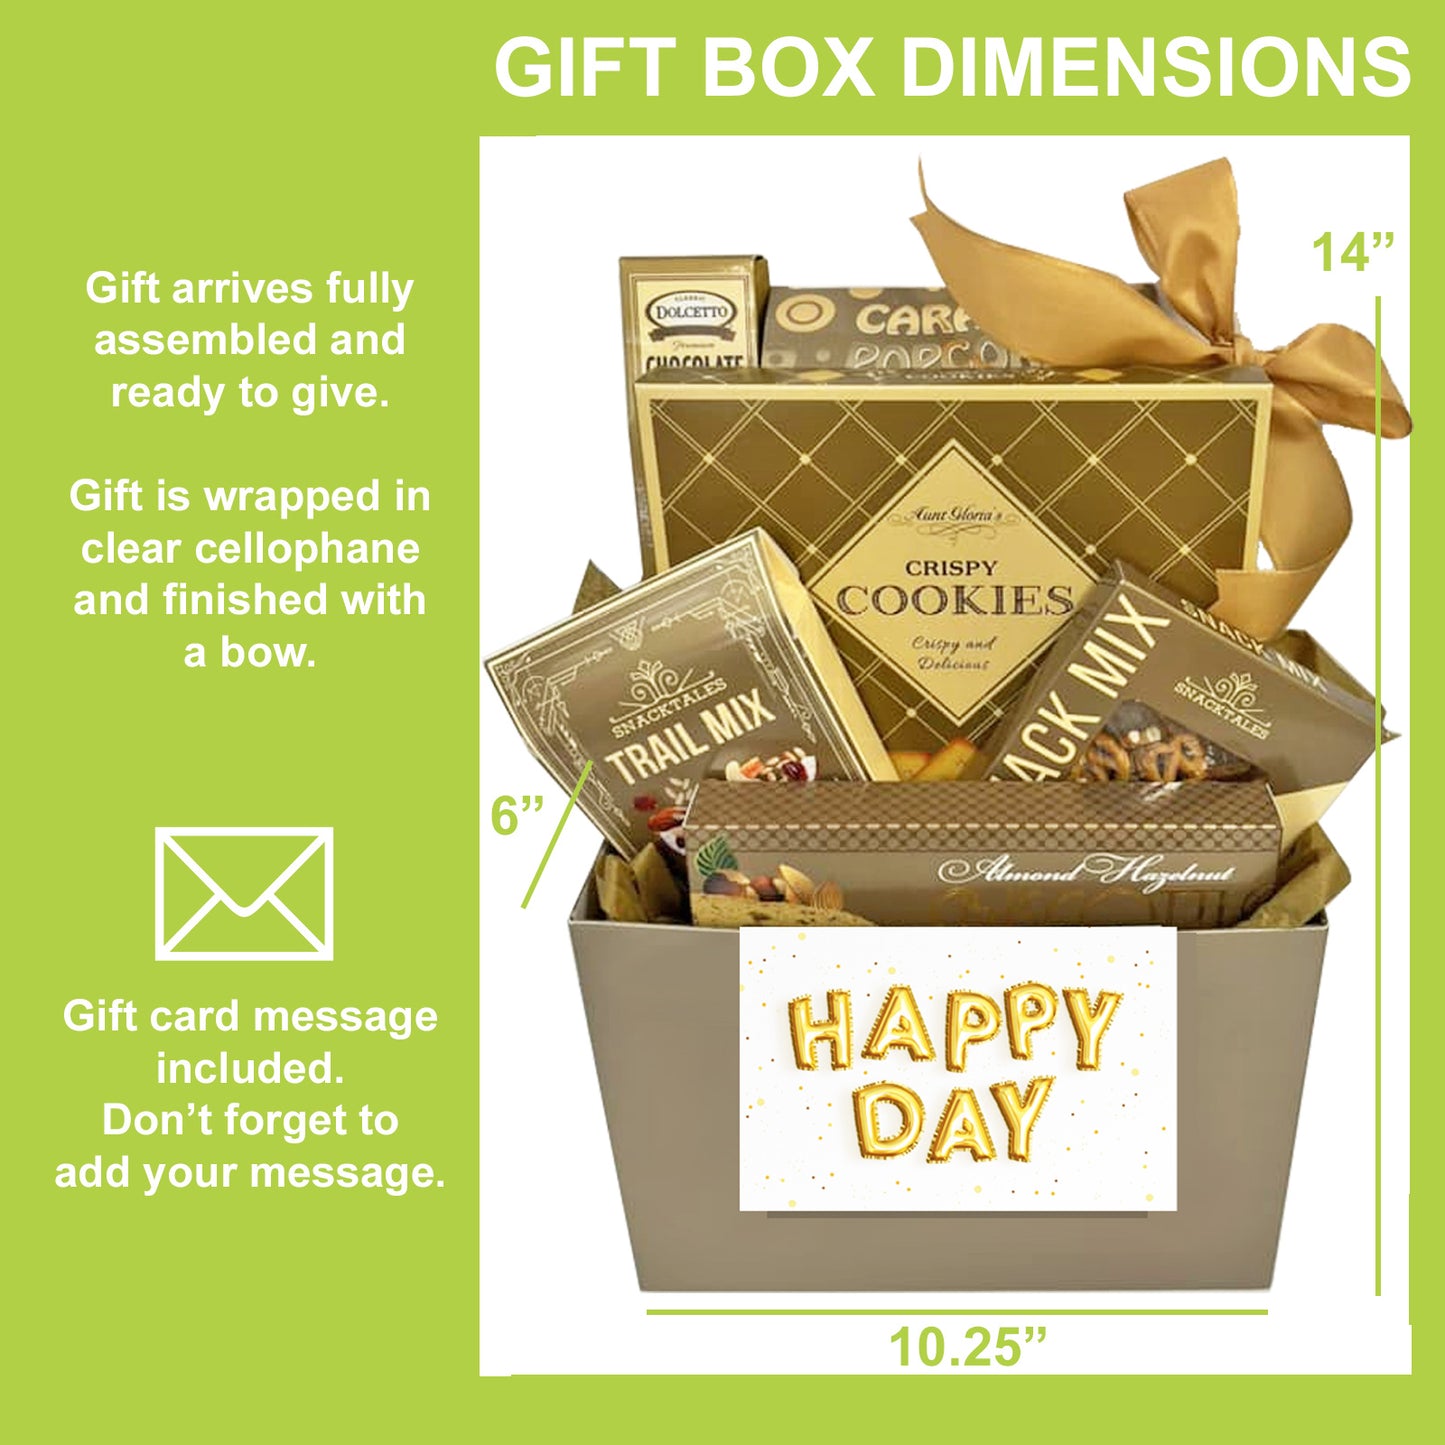 Fabulous Birthday Gift Box for Men, Women, Students, Military, Friends and Family